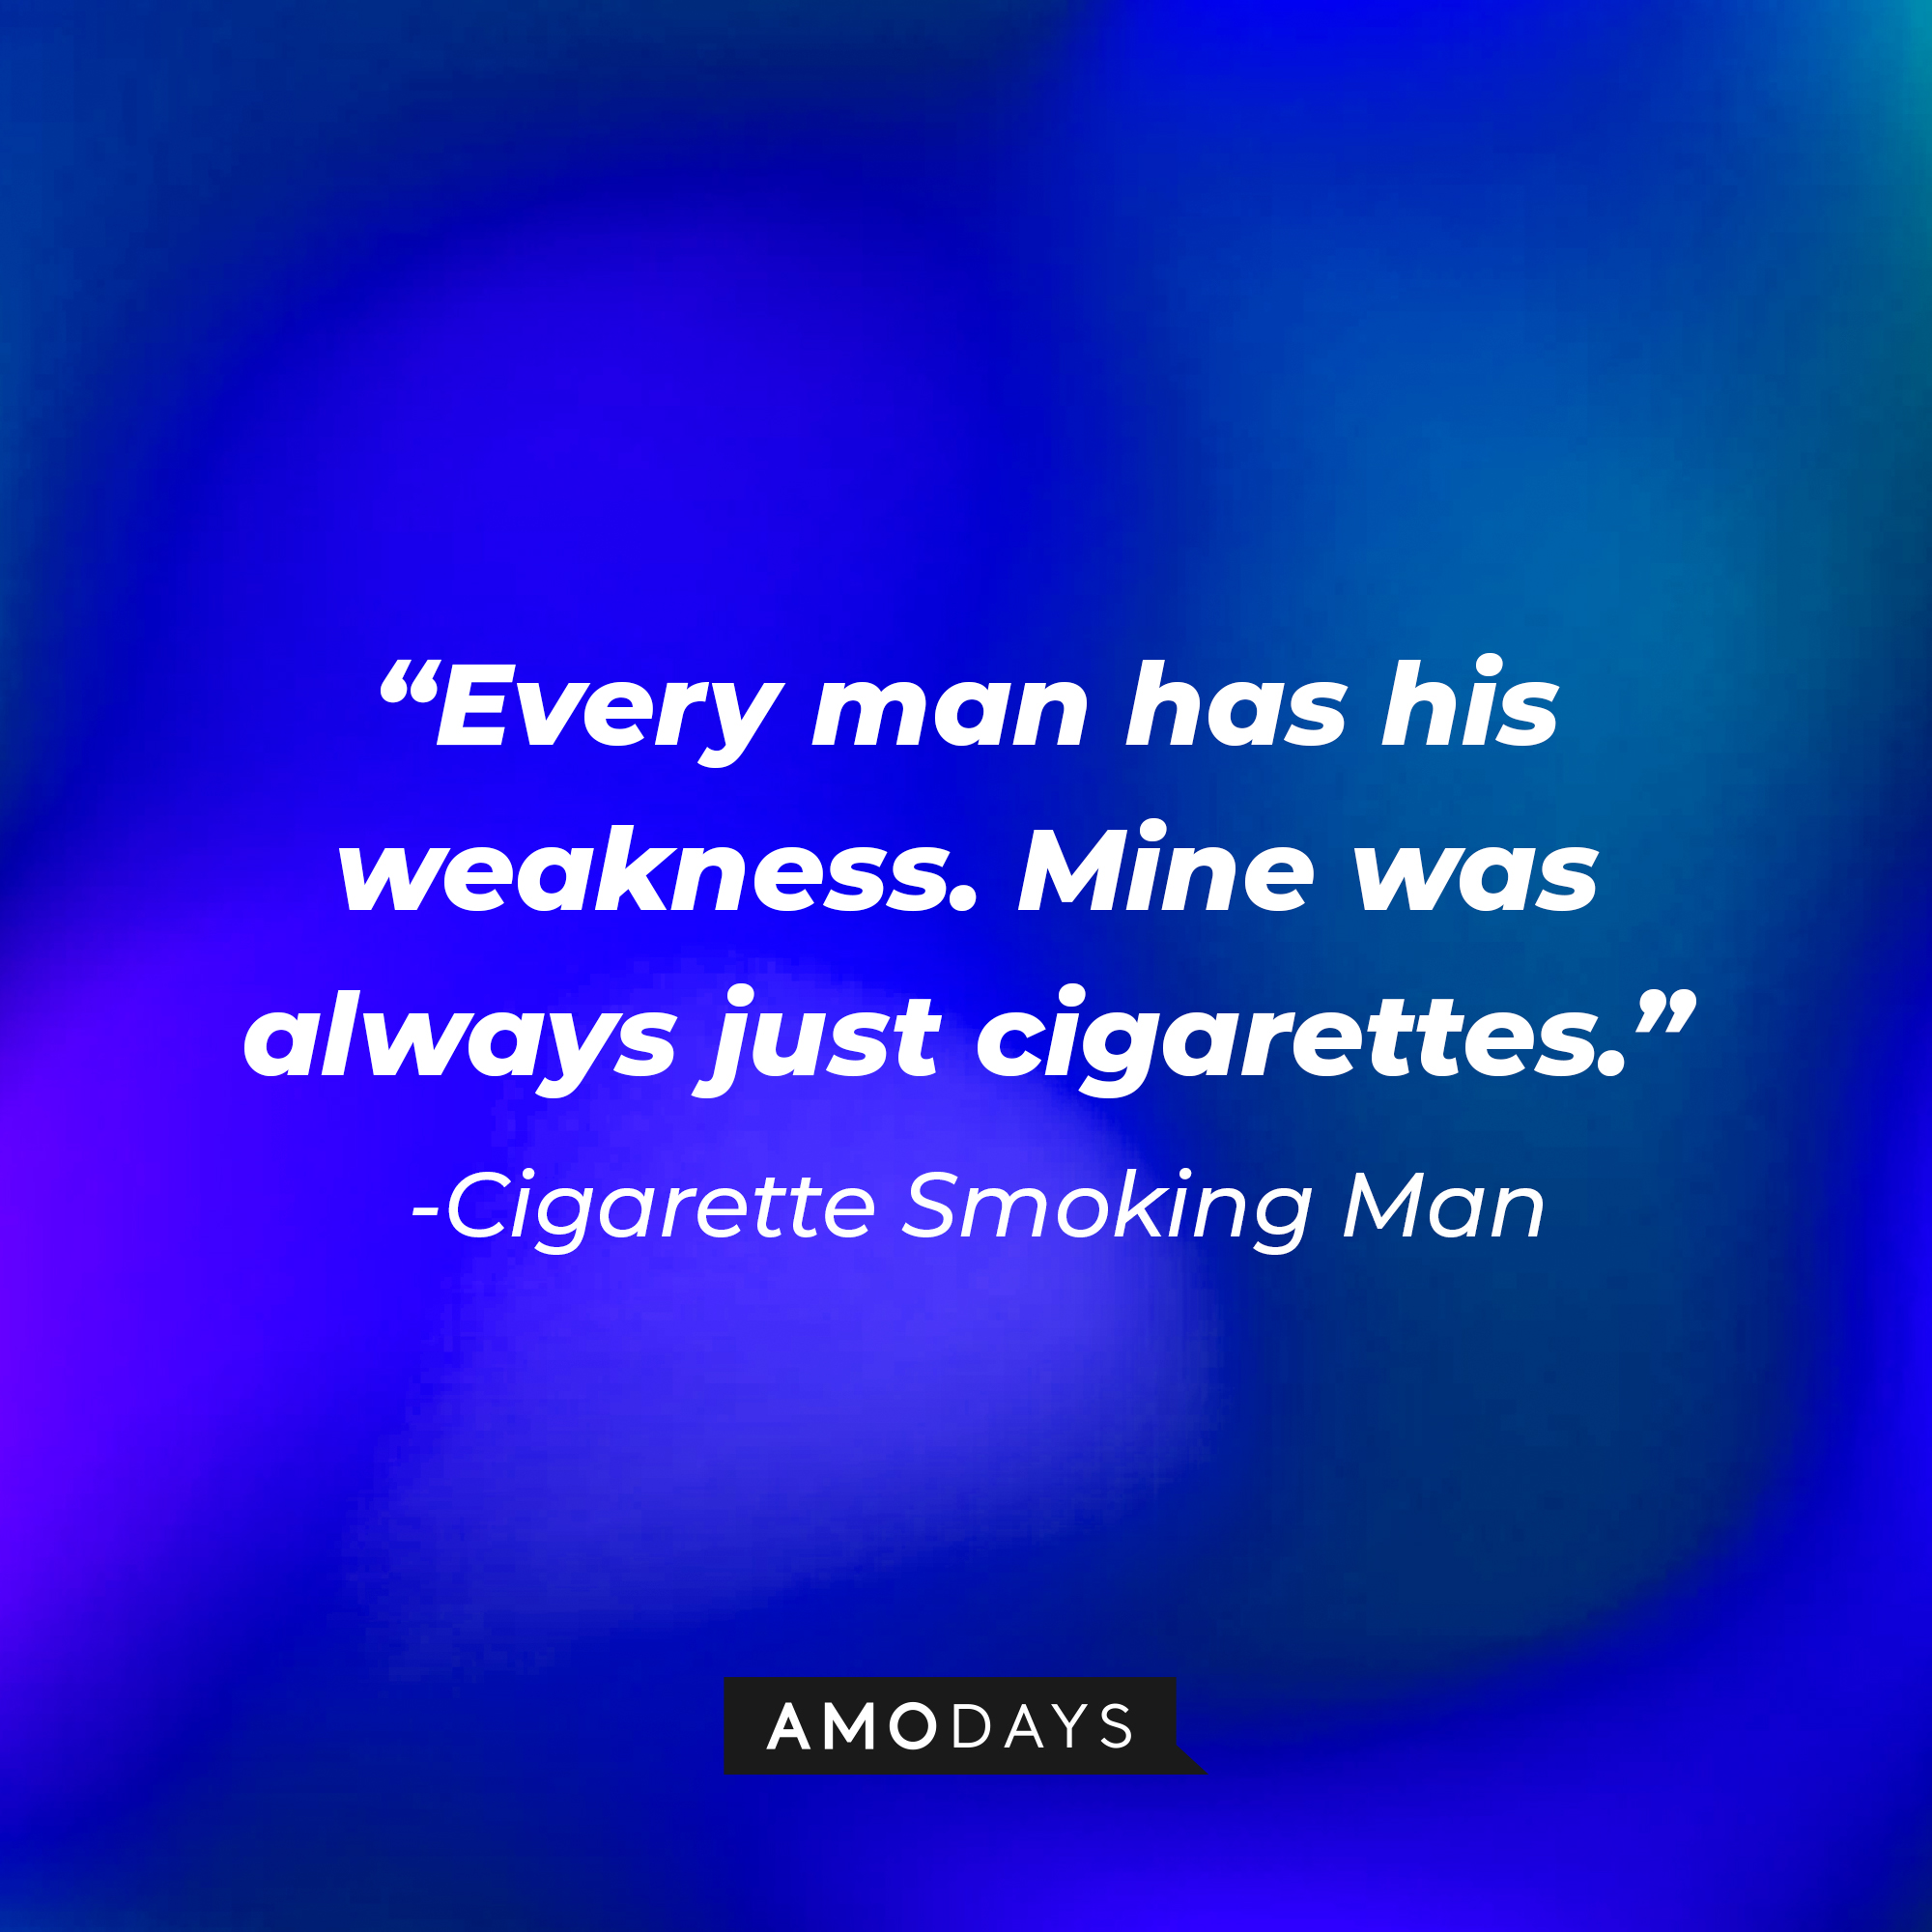 Cigarette Smoking Man's quote: "Every man has his weakness. Mine was always just cigarettes." | Source: AmoDays